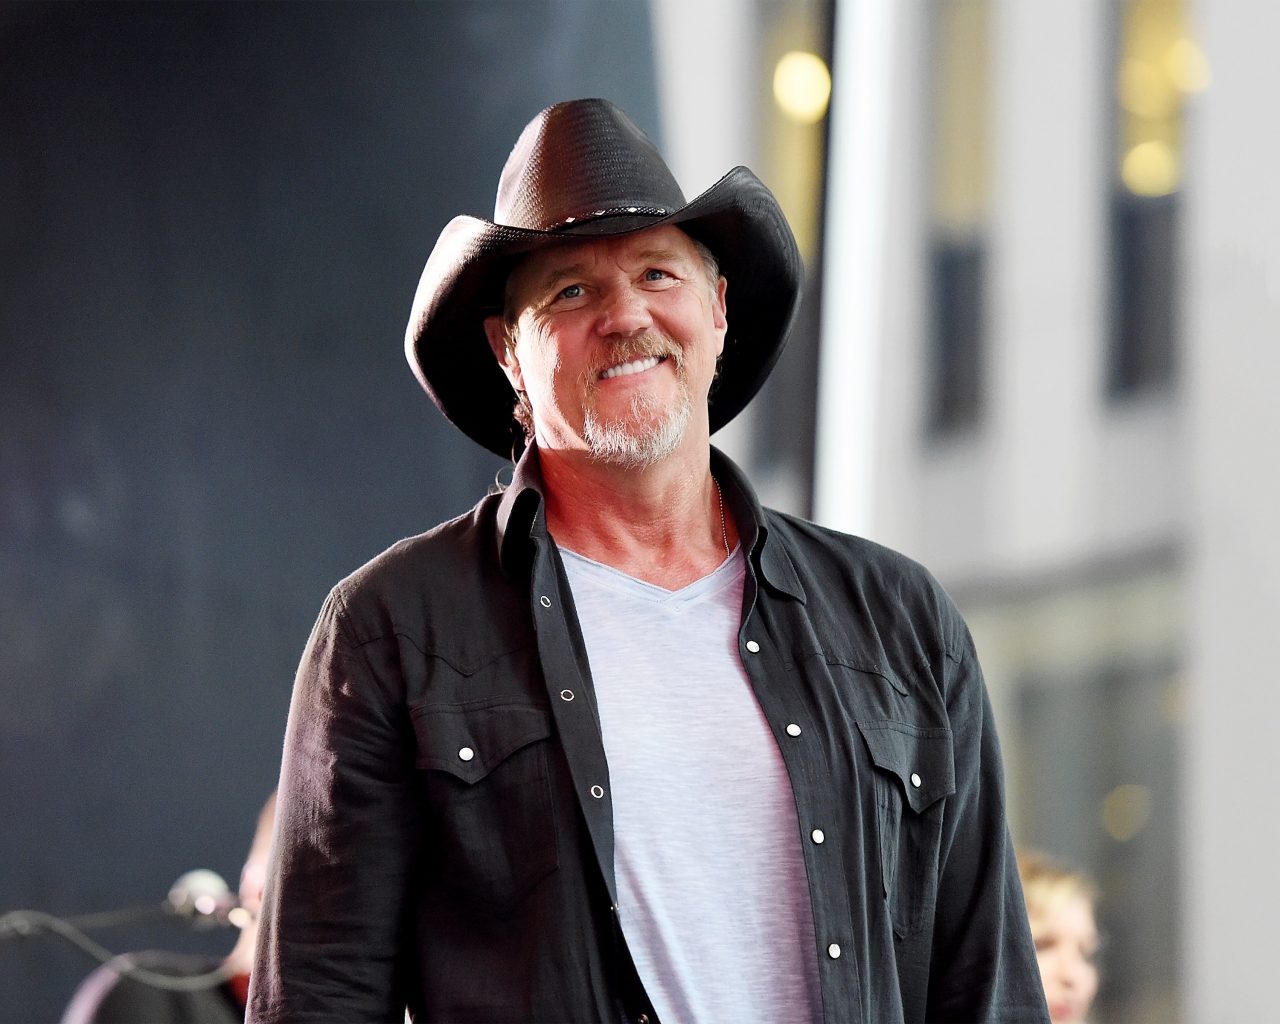 Trace Adkins Isn’t Slowing Down With Don’t Stop Tour 2019